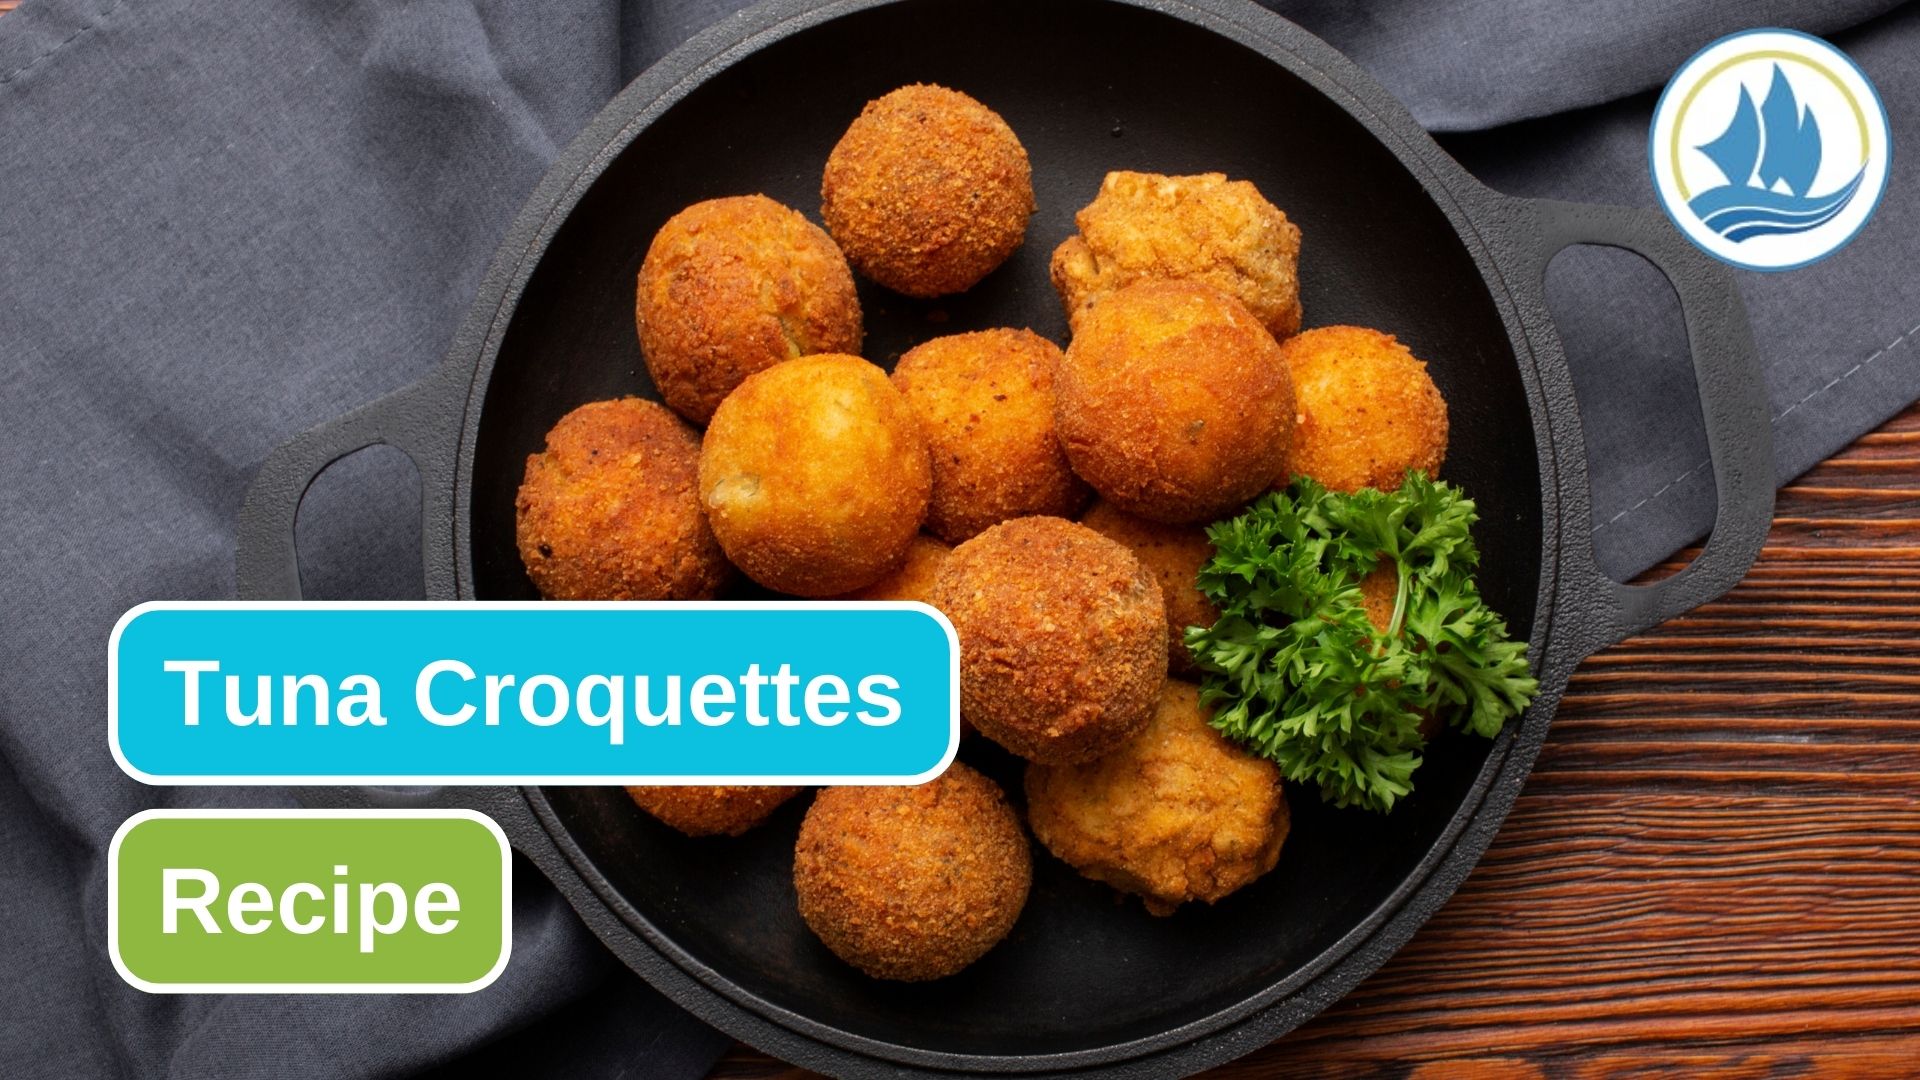 Delicious Tuna Croquettes Recipe to Try at Home 